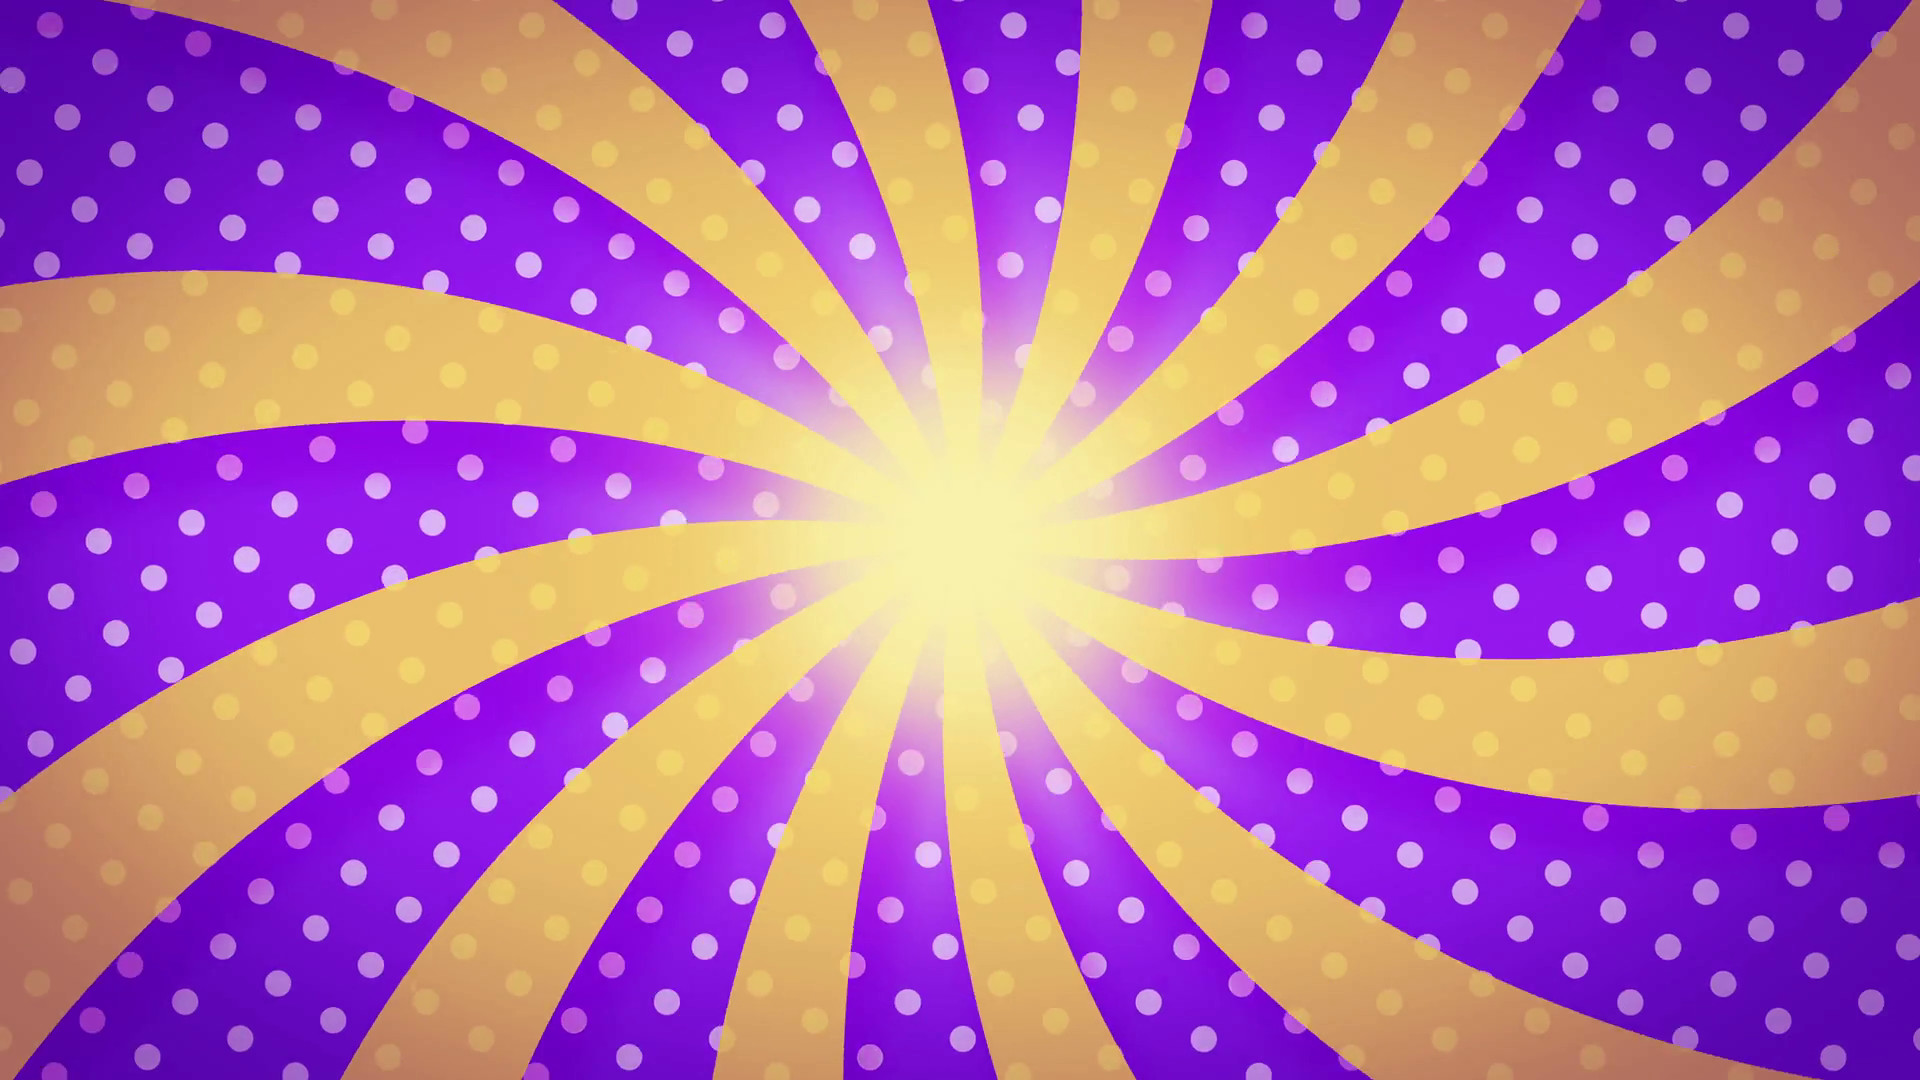 1920x1080 golden Twisted Sunburst rotating over purple background With white Dots  Pattern seamless loop for your logo